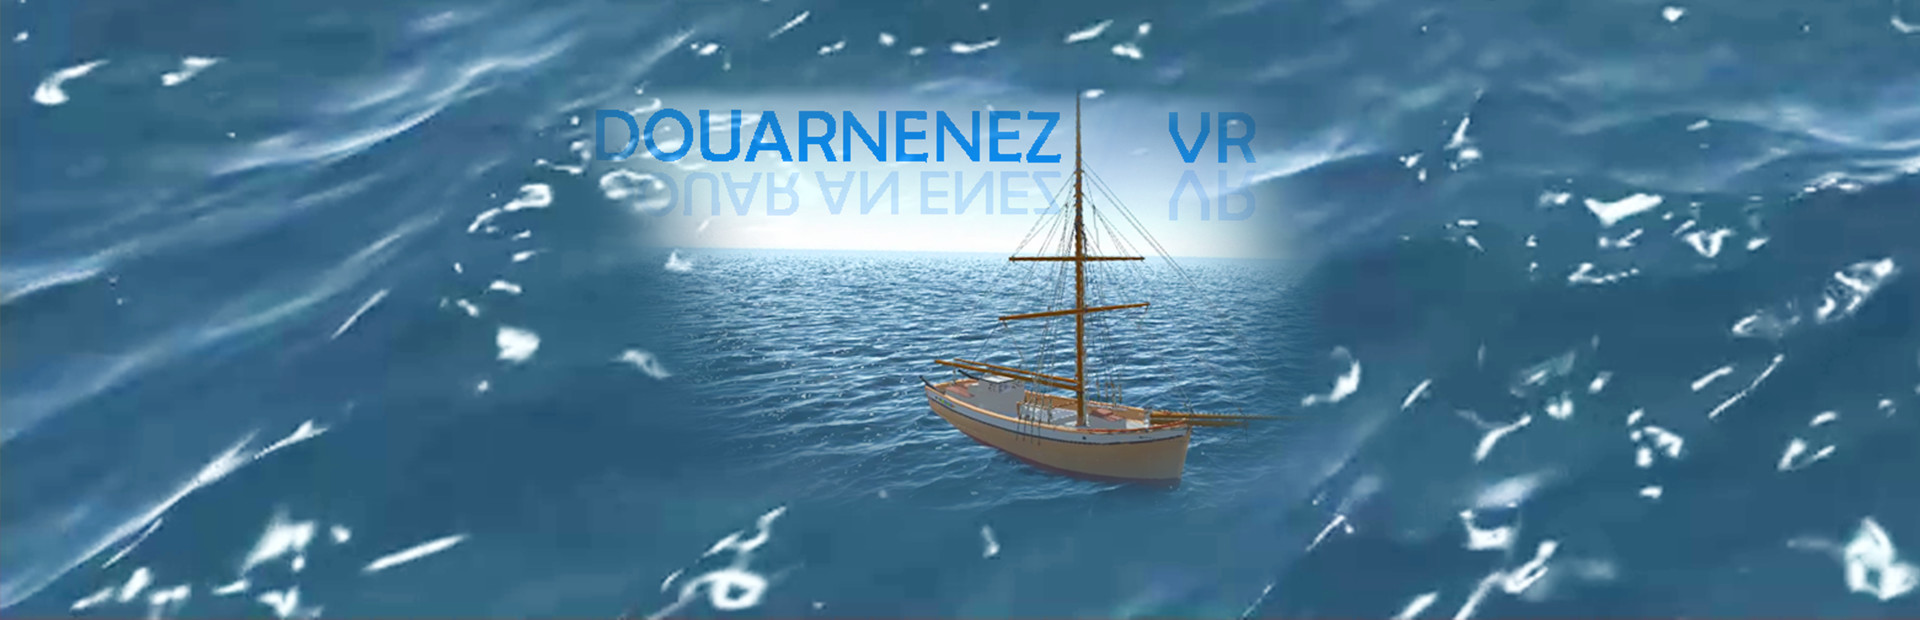 Douarnenez VR cover image